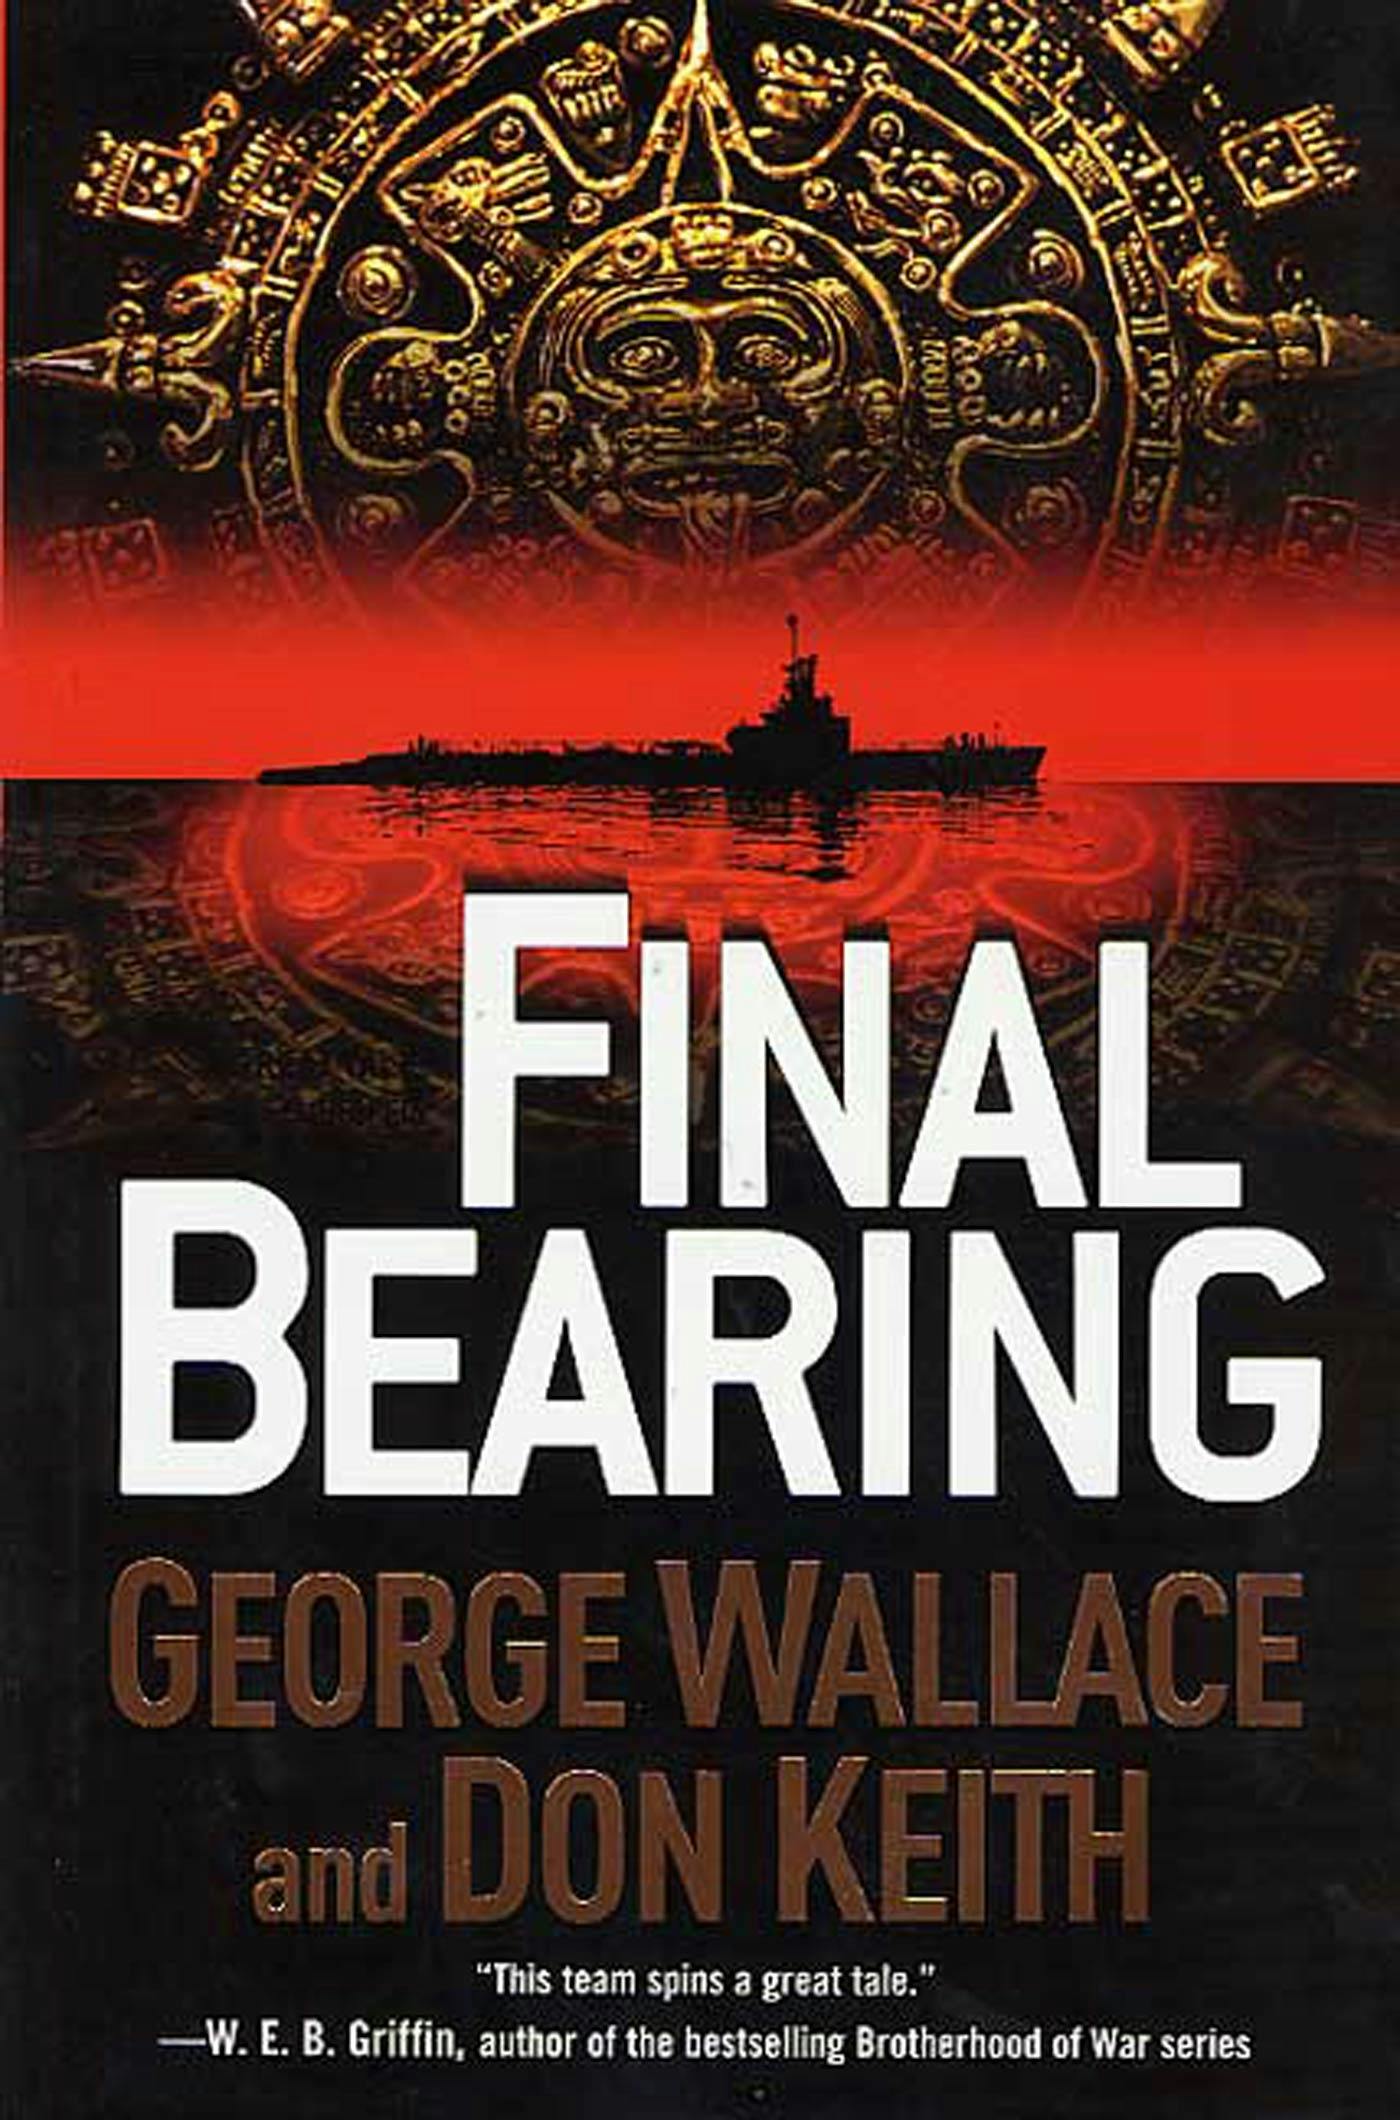 Cover for the book titled as: Final Bearing